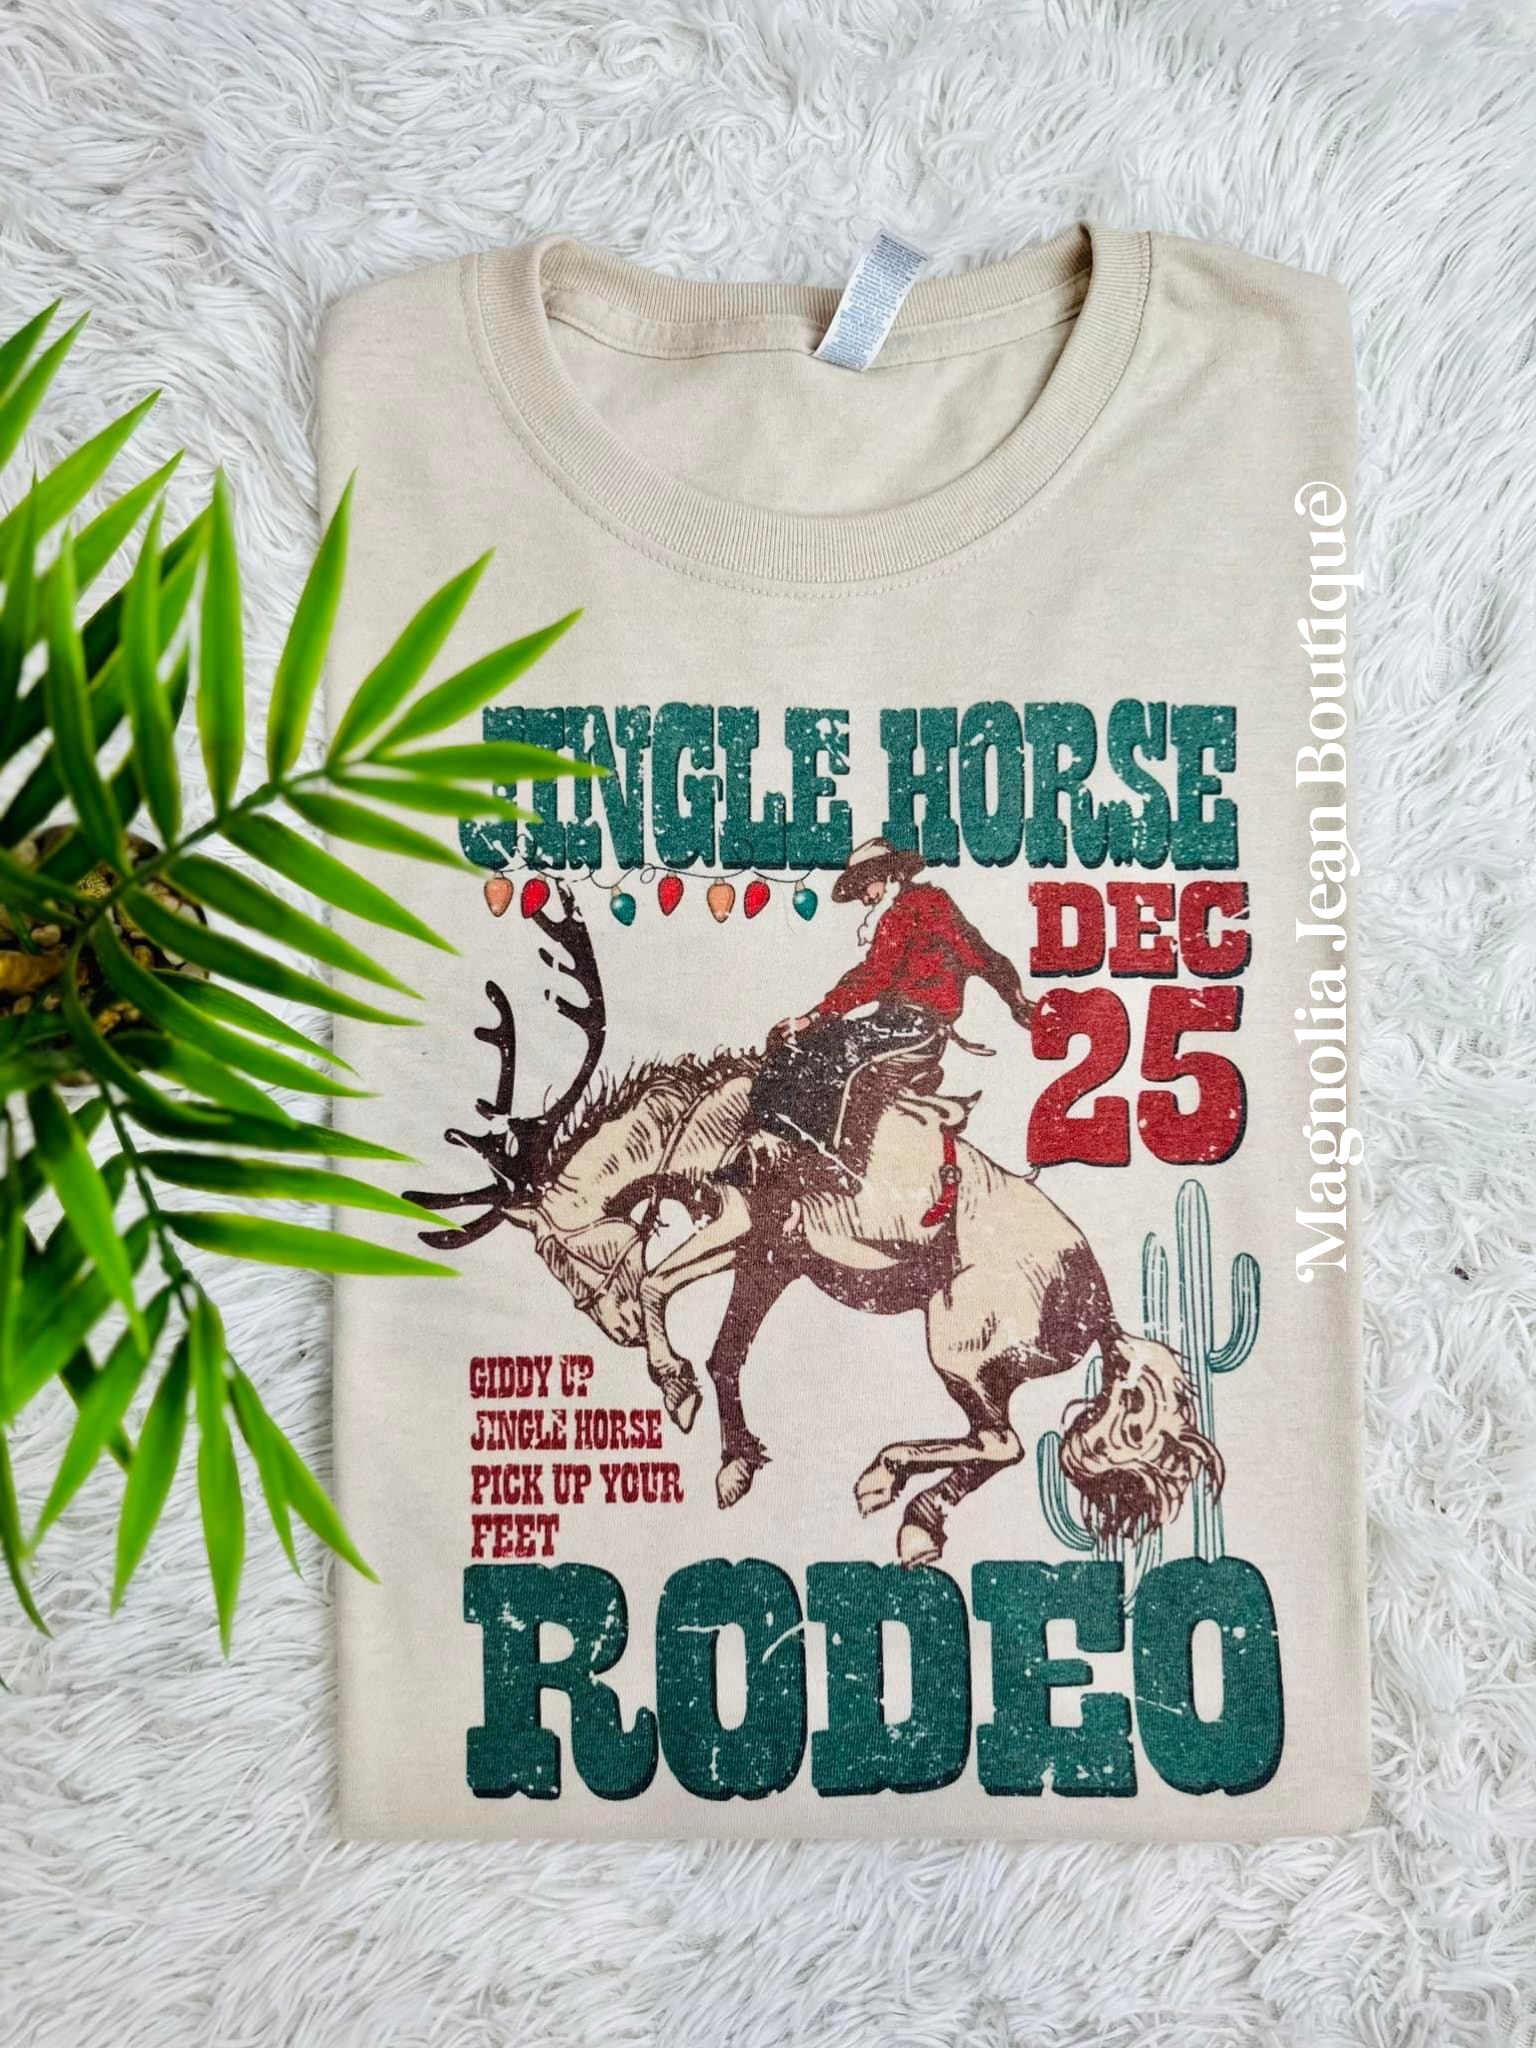 🎄Special Order Tee🎄 S-4X Jingle Horse Rodeo Tee